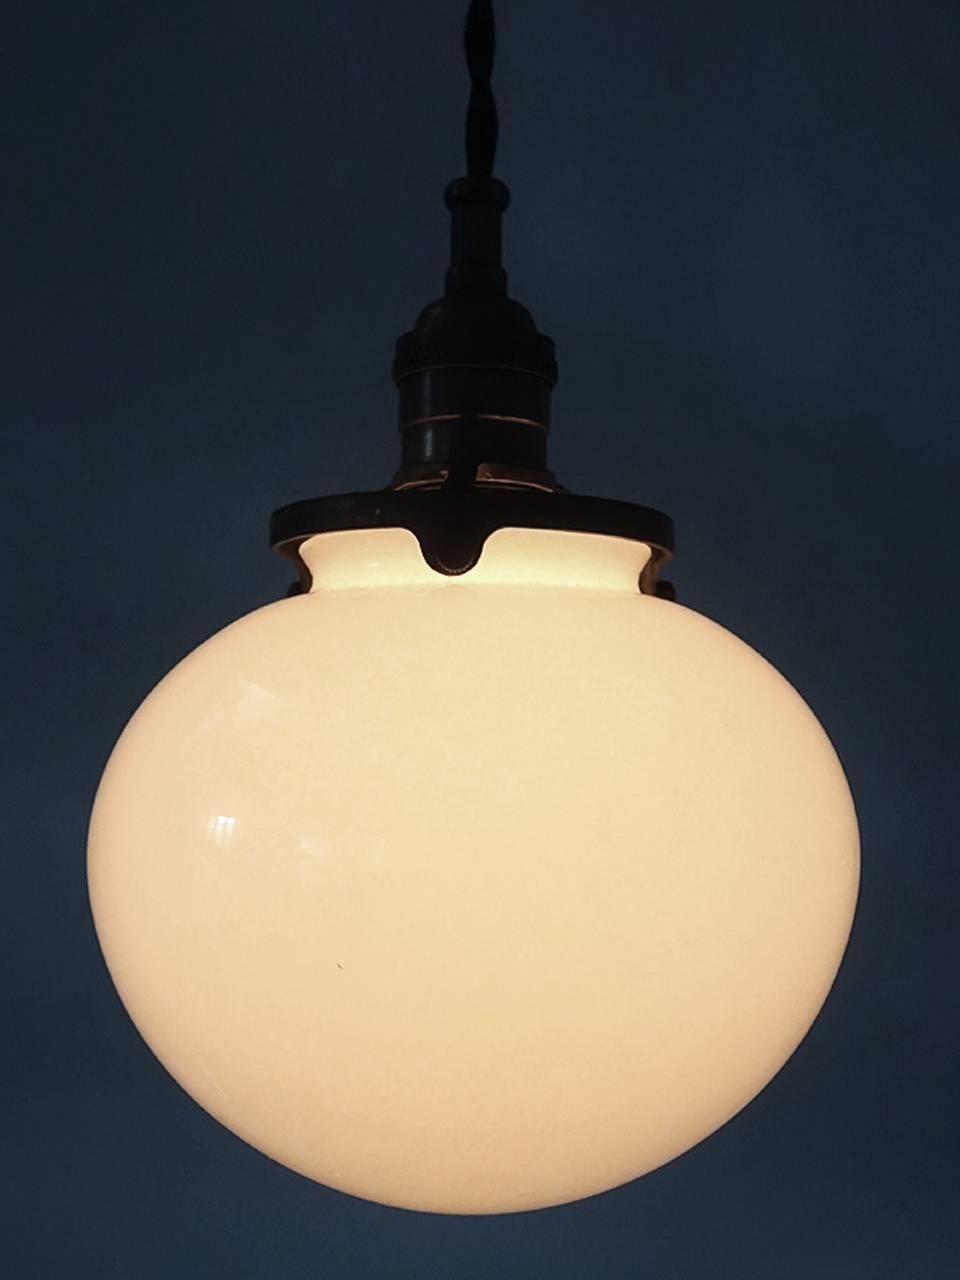 The glass on these globes are simple and very elegant. They are sandwich glass with an outer layer of Vaseline over milk glass. It has a nice warm glow and the milk glass helps spread the light evenly with no glare. There is a full moon look to the